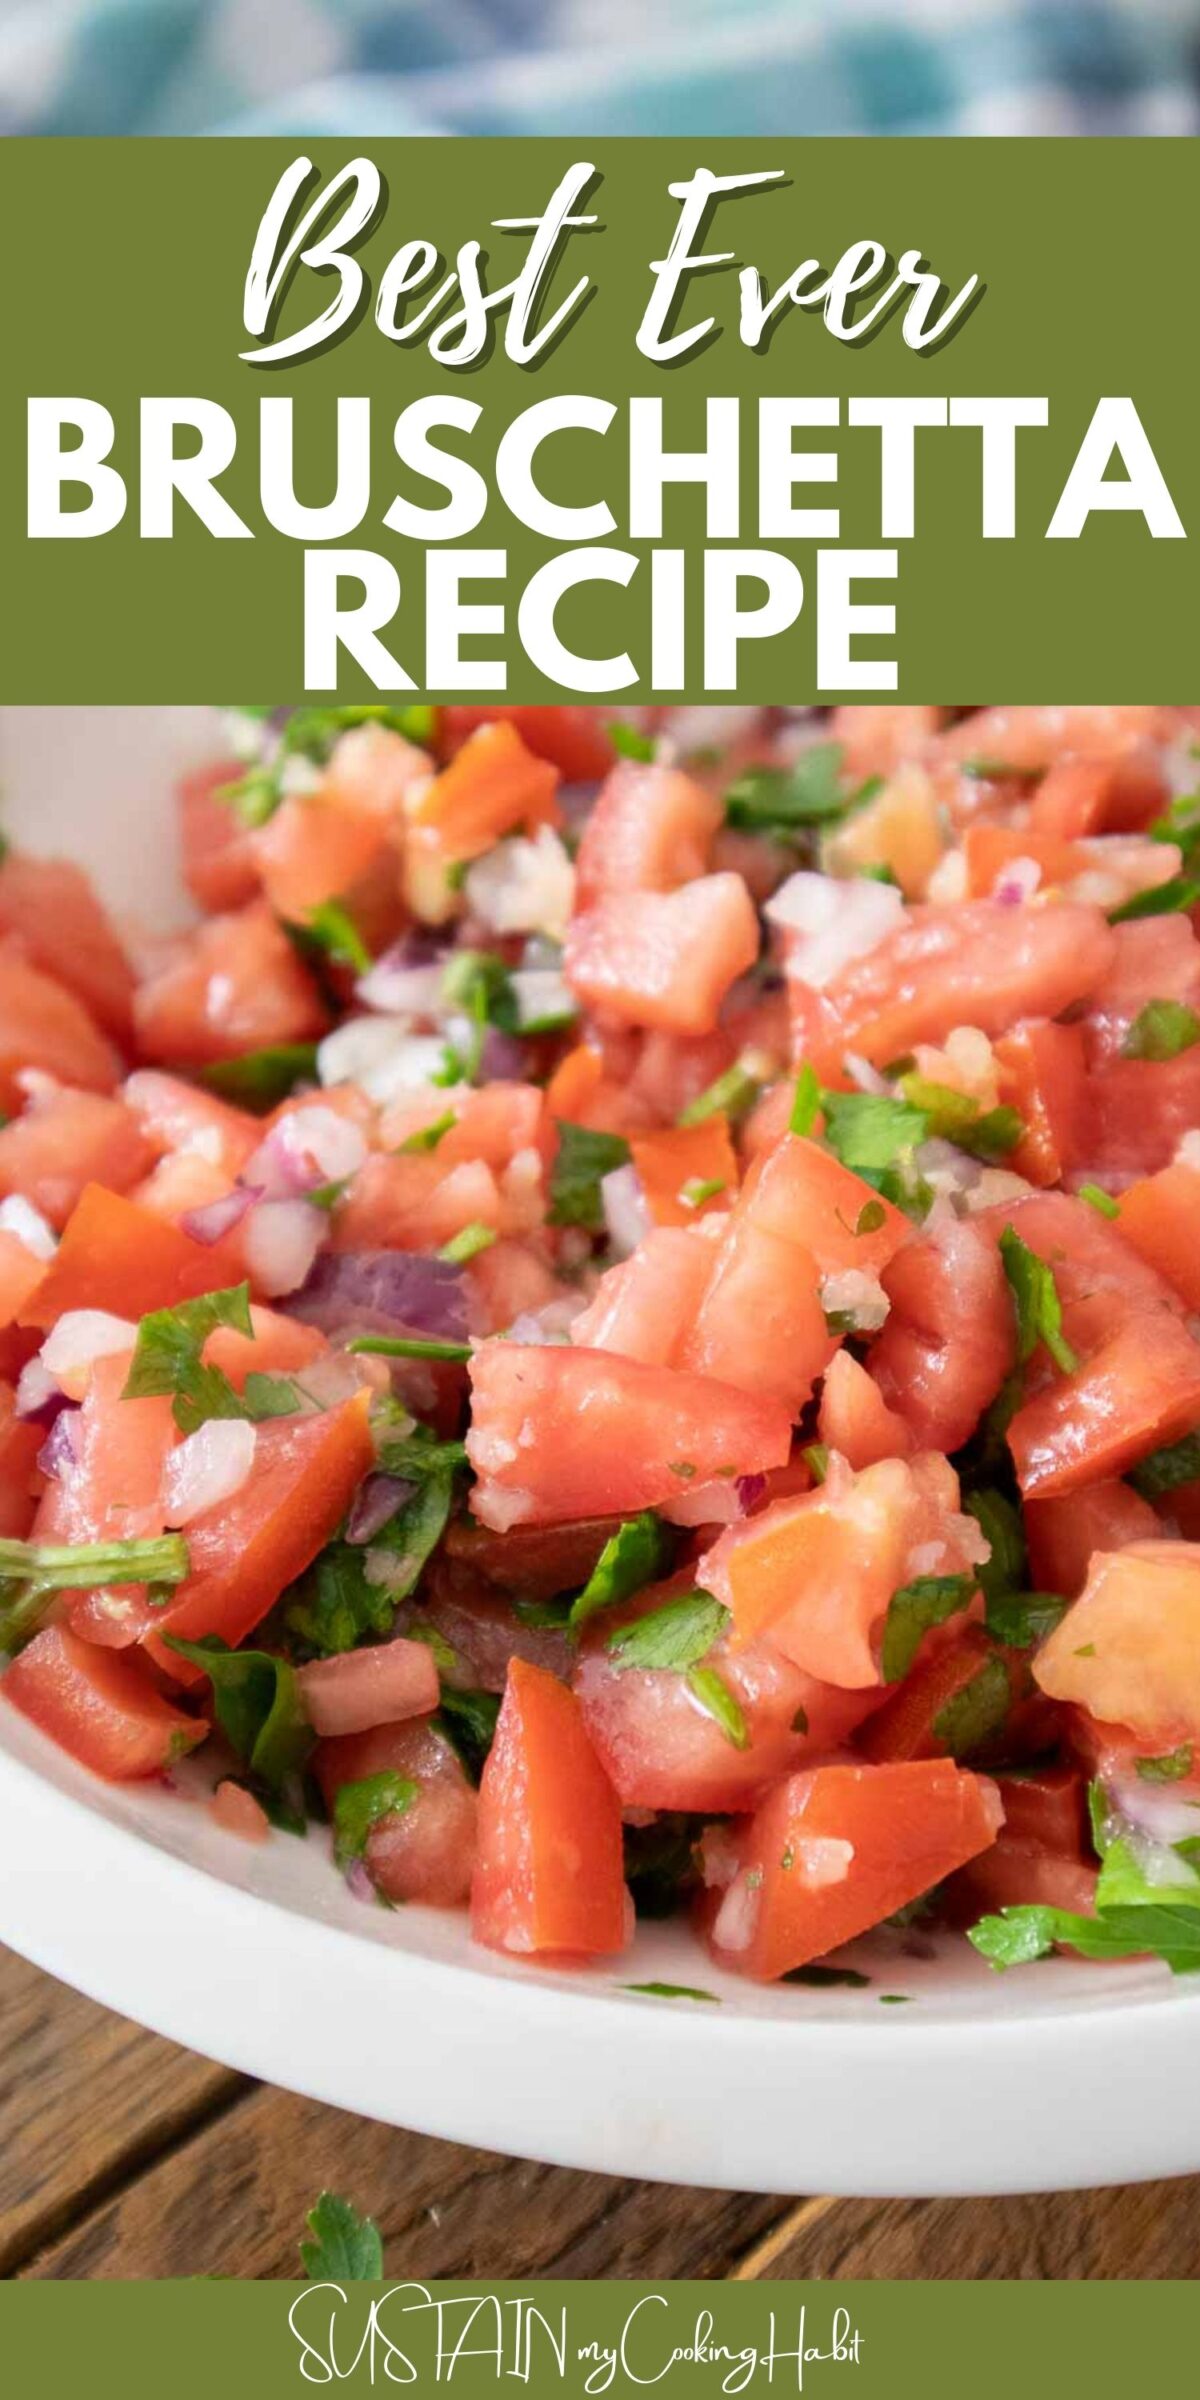 Close up of bruschetta ingredients with text overlay.